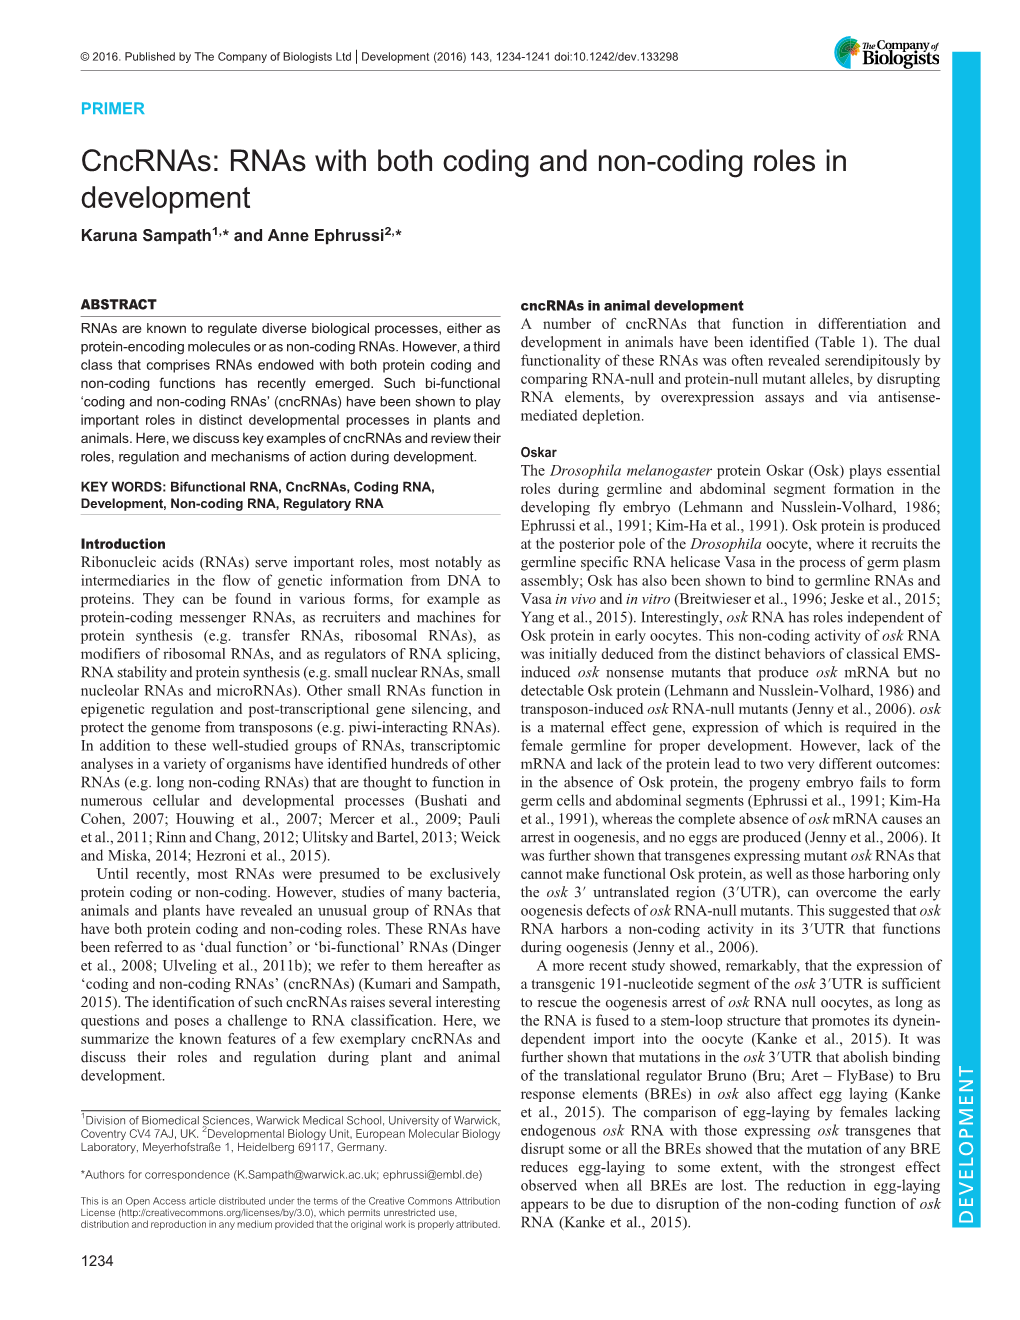 Cncrnas: Rnas with Both Coding and Non-Coding Roles in Development Karuna Sampath1,* and Anne Ephrussi2,*